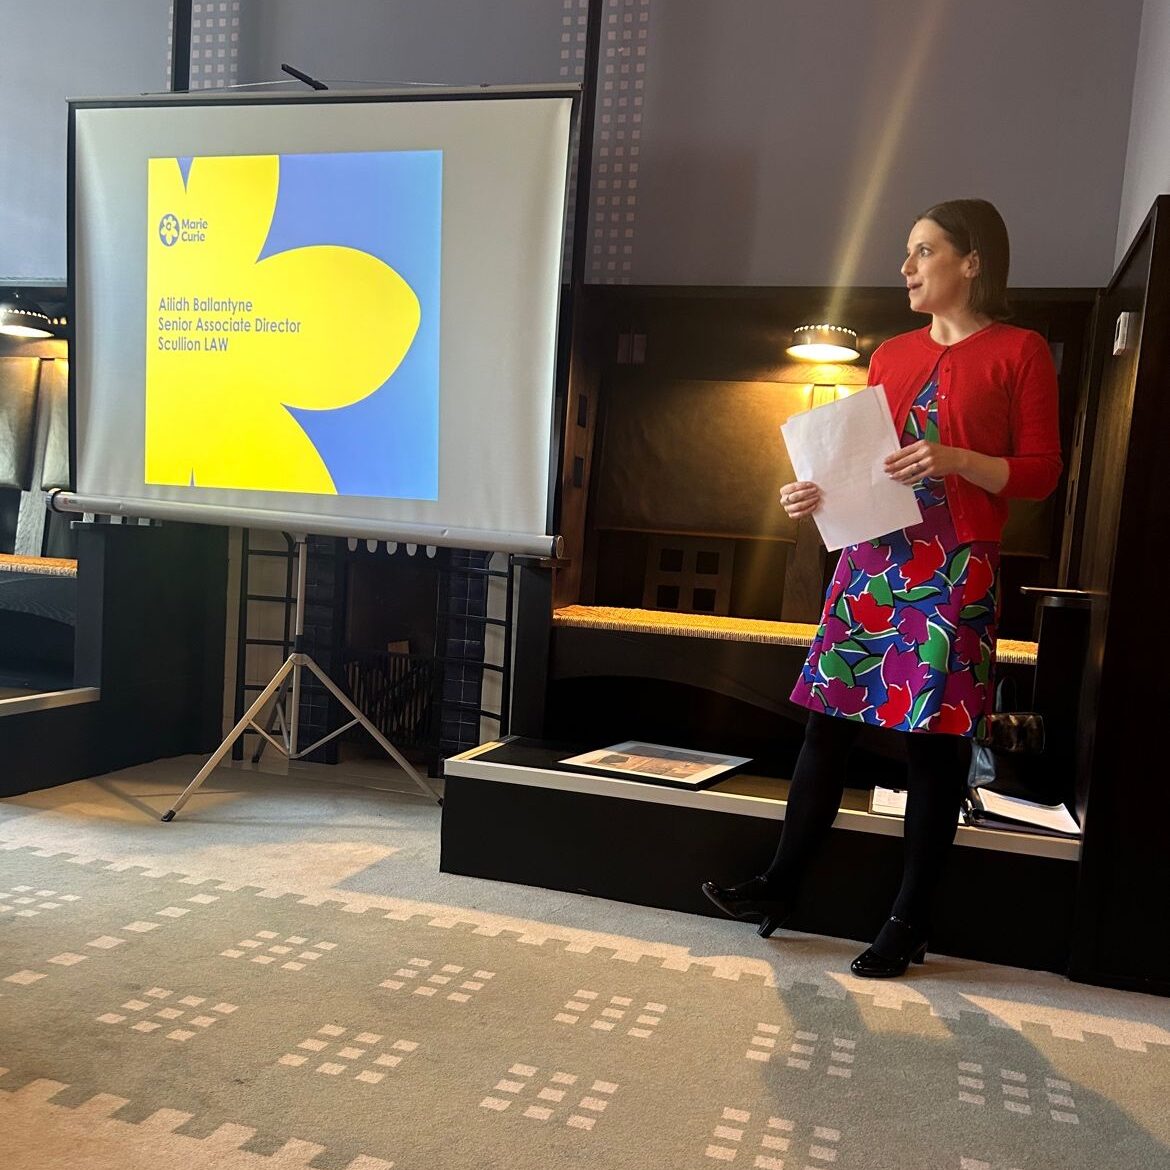 Senior Associate Director Ailidh Ballantyne and Trainee Solicitor Sarah Monaghan attended Care for the Future in aid of Marie Curie.